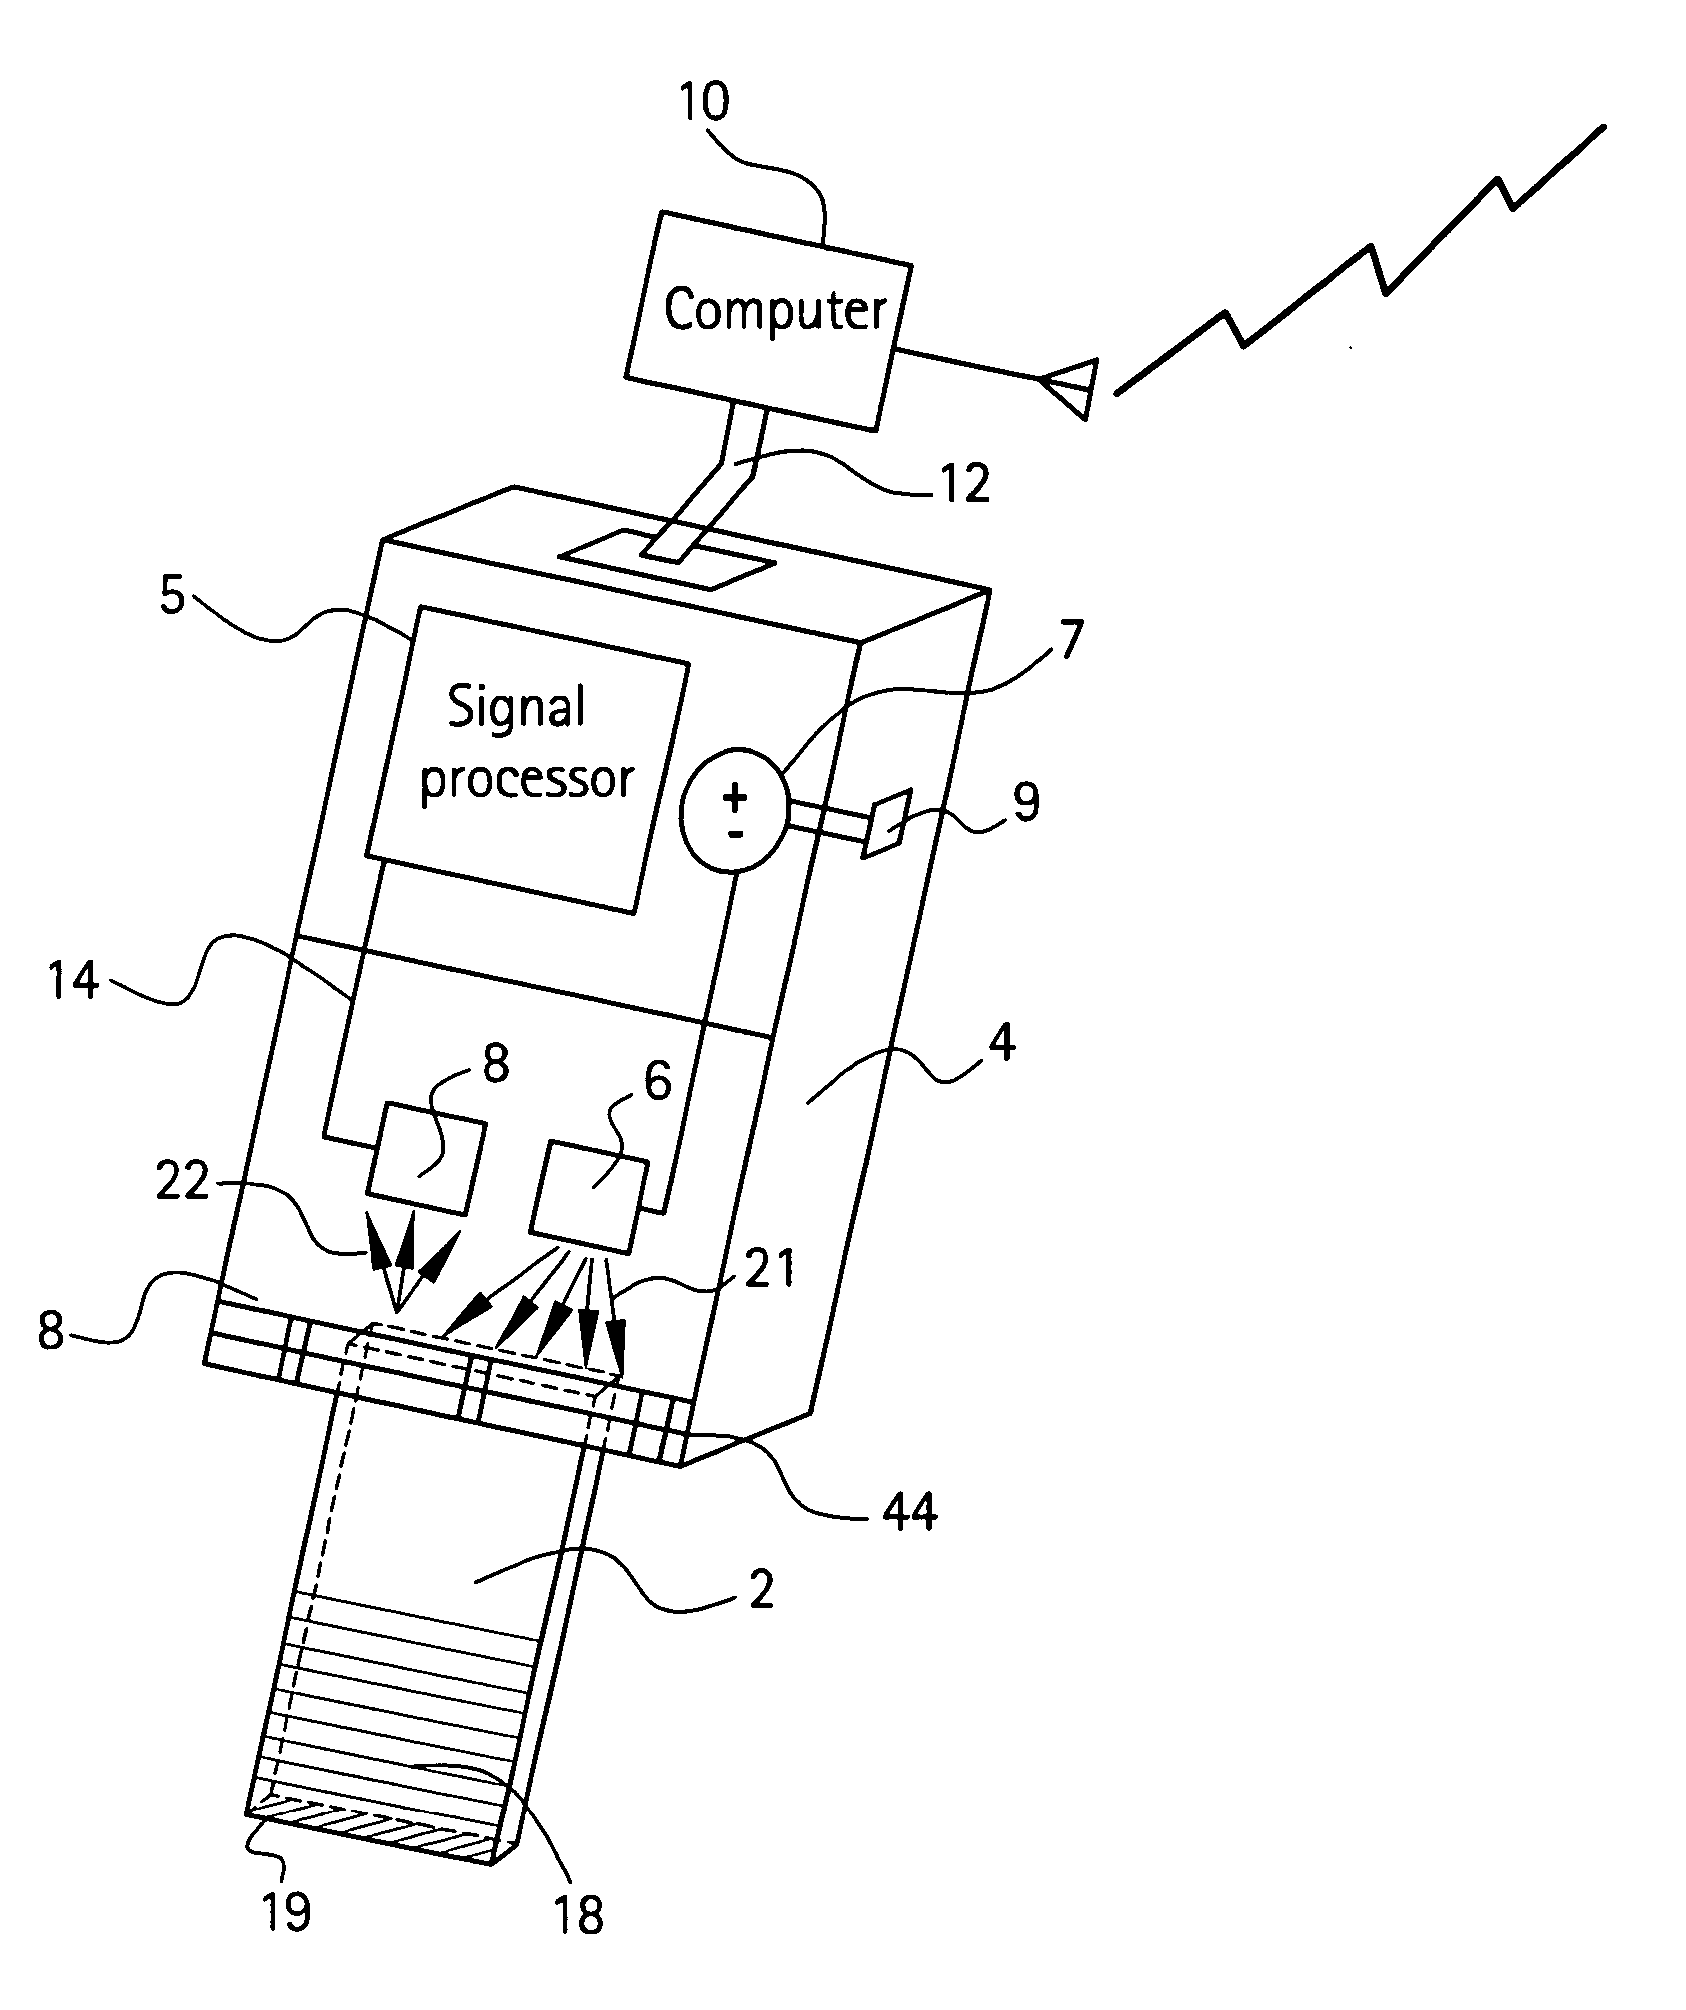 Handheld device with a disposable element for chemical analysis of multiple analytes